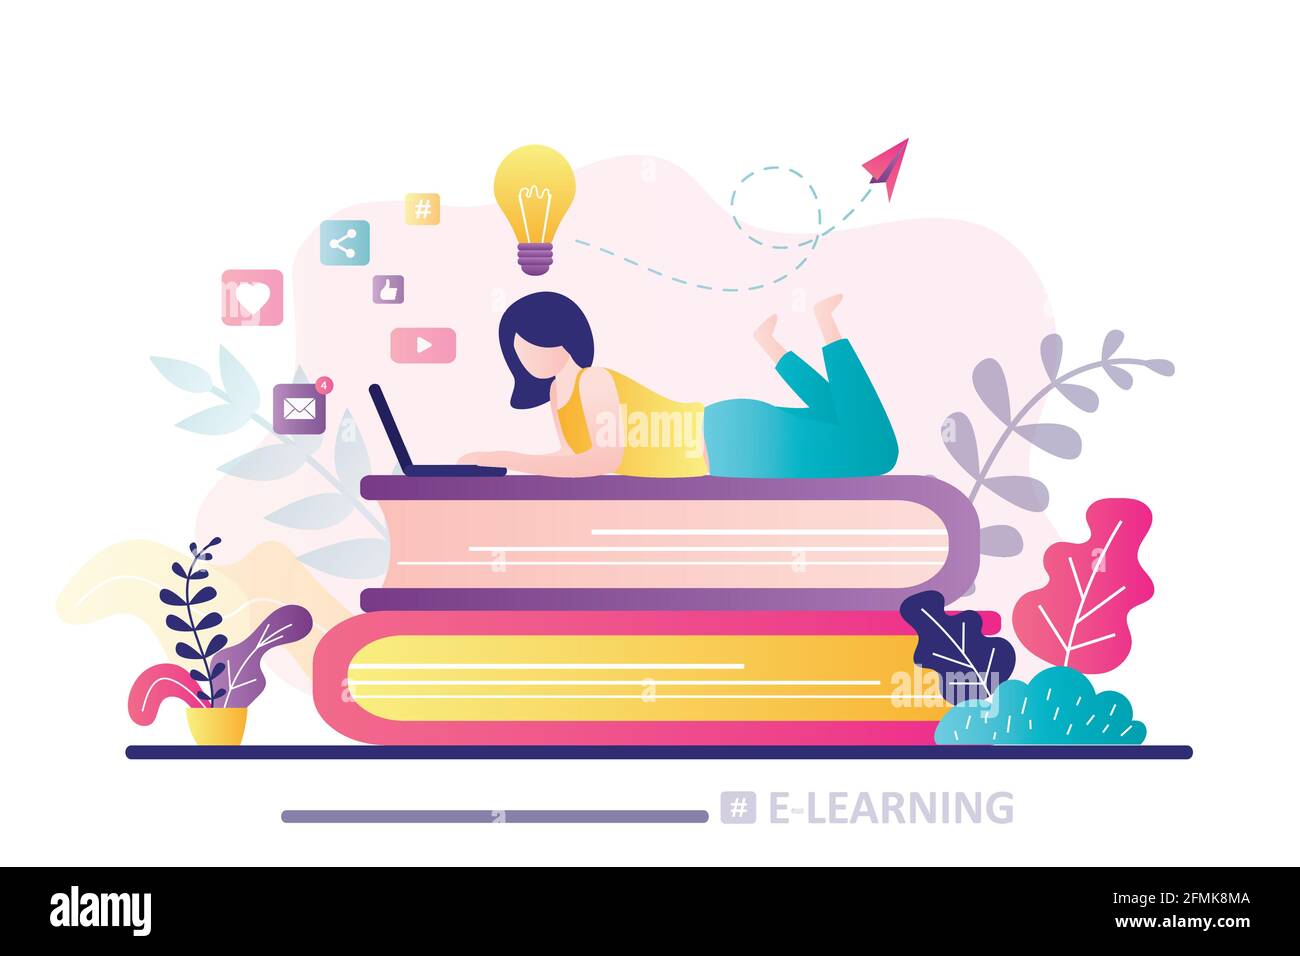 E-learning banner. Online education, home schooling. Girl student working on laptop. Web courses or tutorials. Education, brainstorming concept. Woman Stock Vector